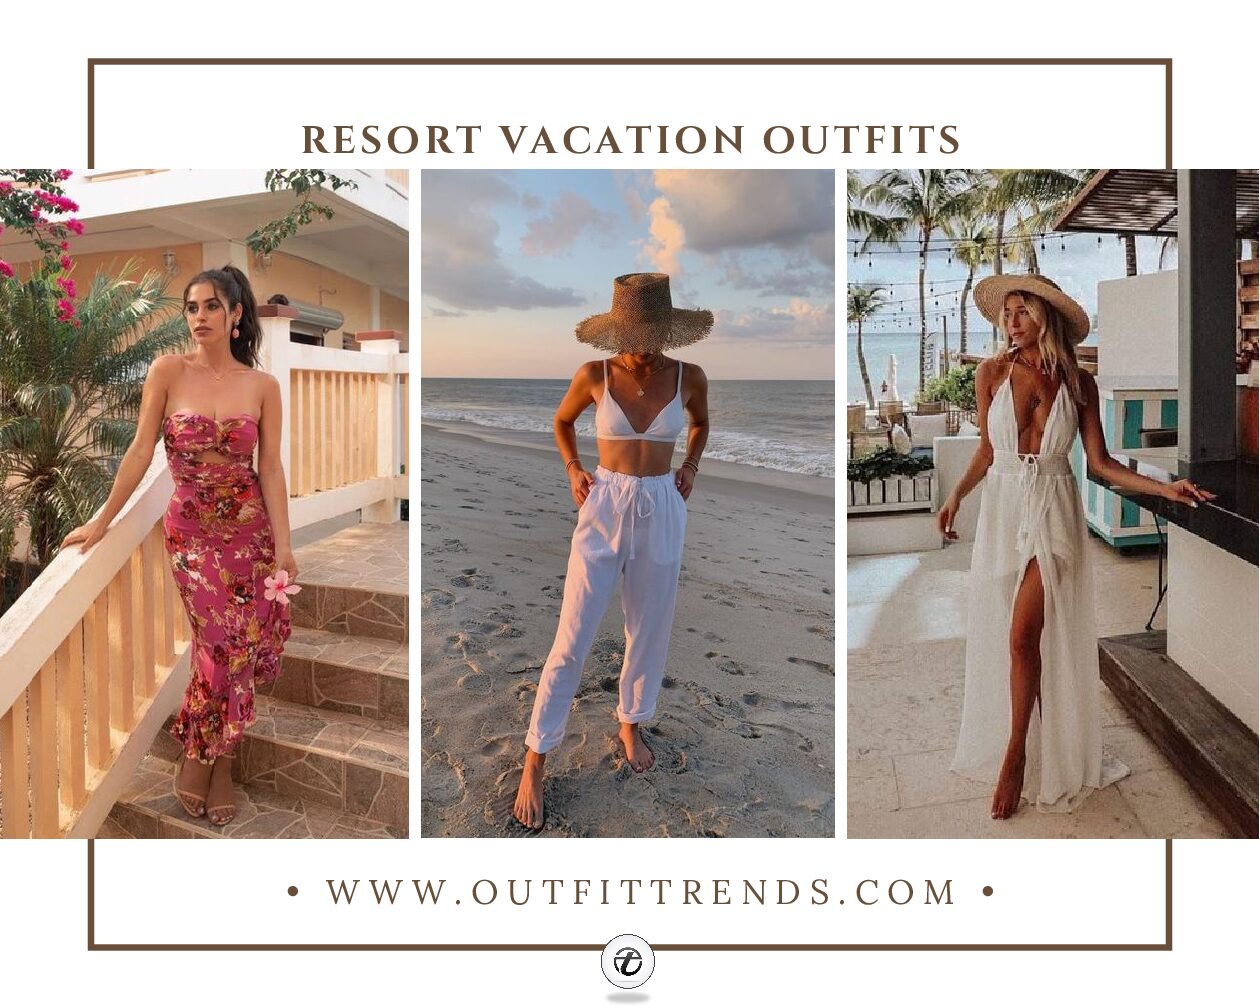 Resort Vacation Outfits – 20 Outfits To Pack For The Resort